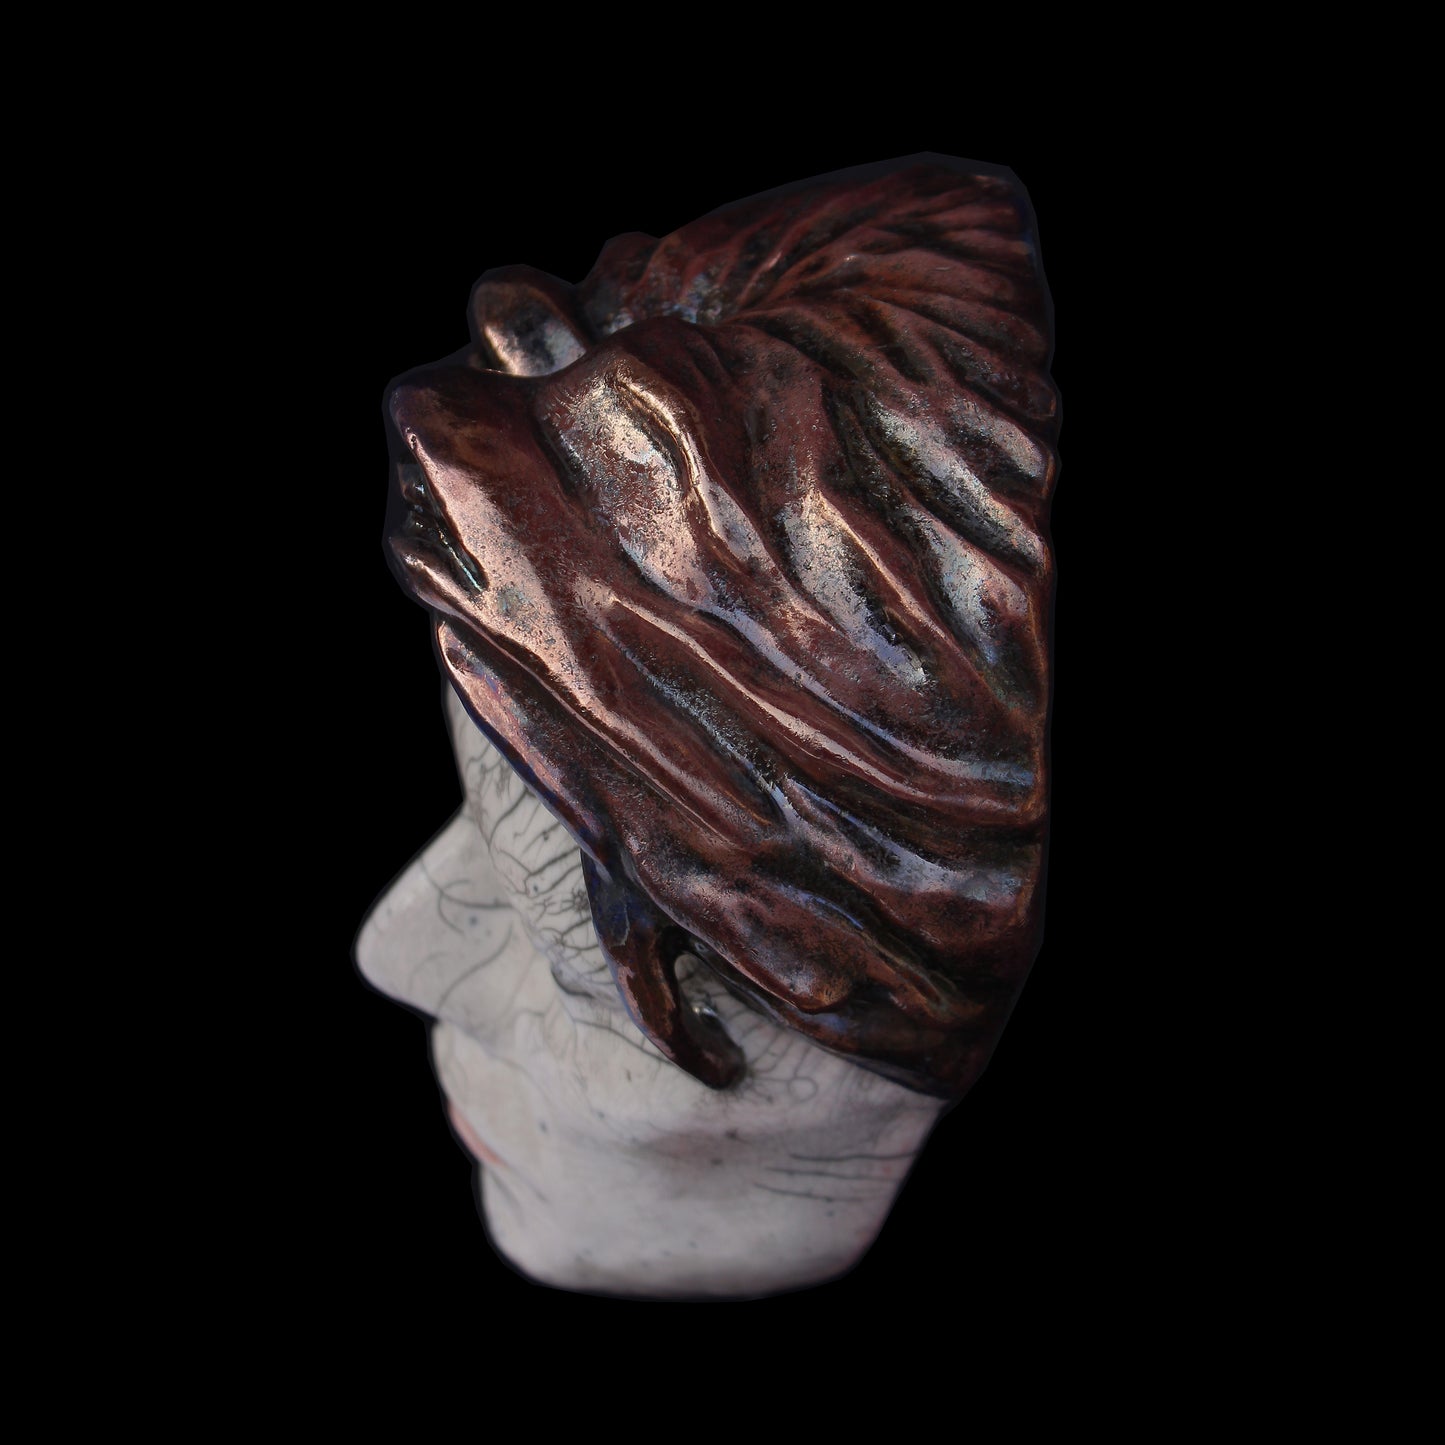 David Bowie - Edition n14 - The Man Who Fell To Earth Raku Ceramic Mask Sculpture